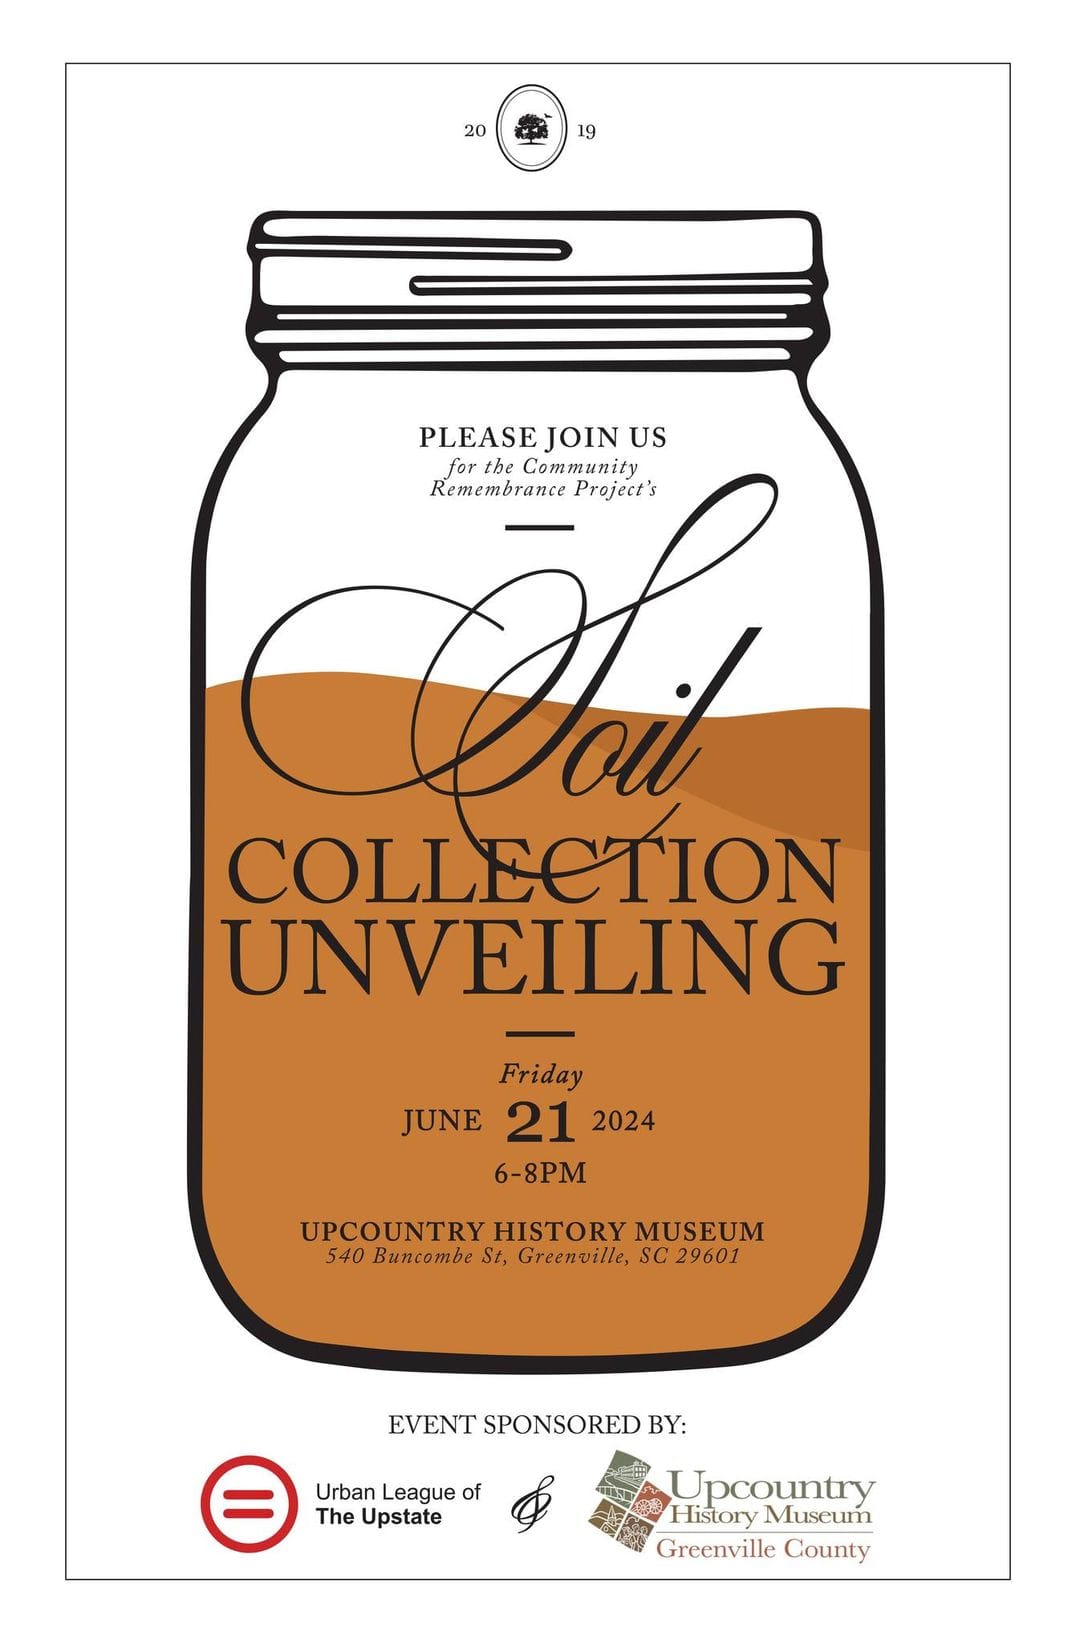 Image with event details - June 21, 6-8 PM Soil Collection Unveiling at Upcountry History Museum